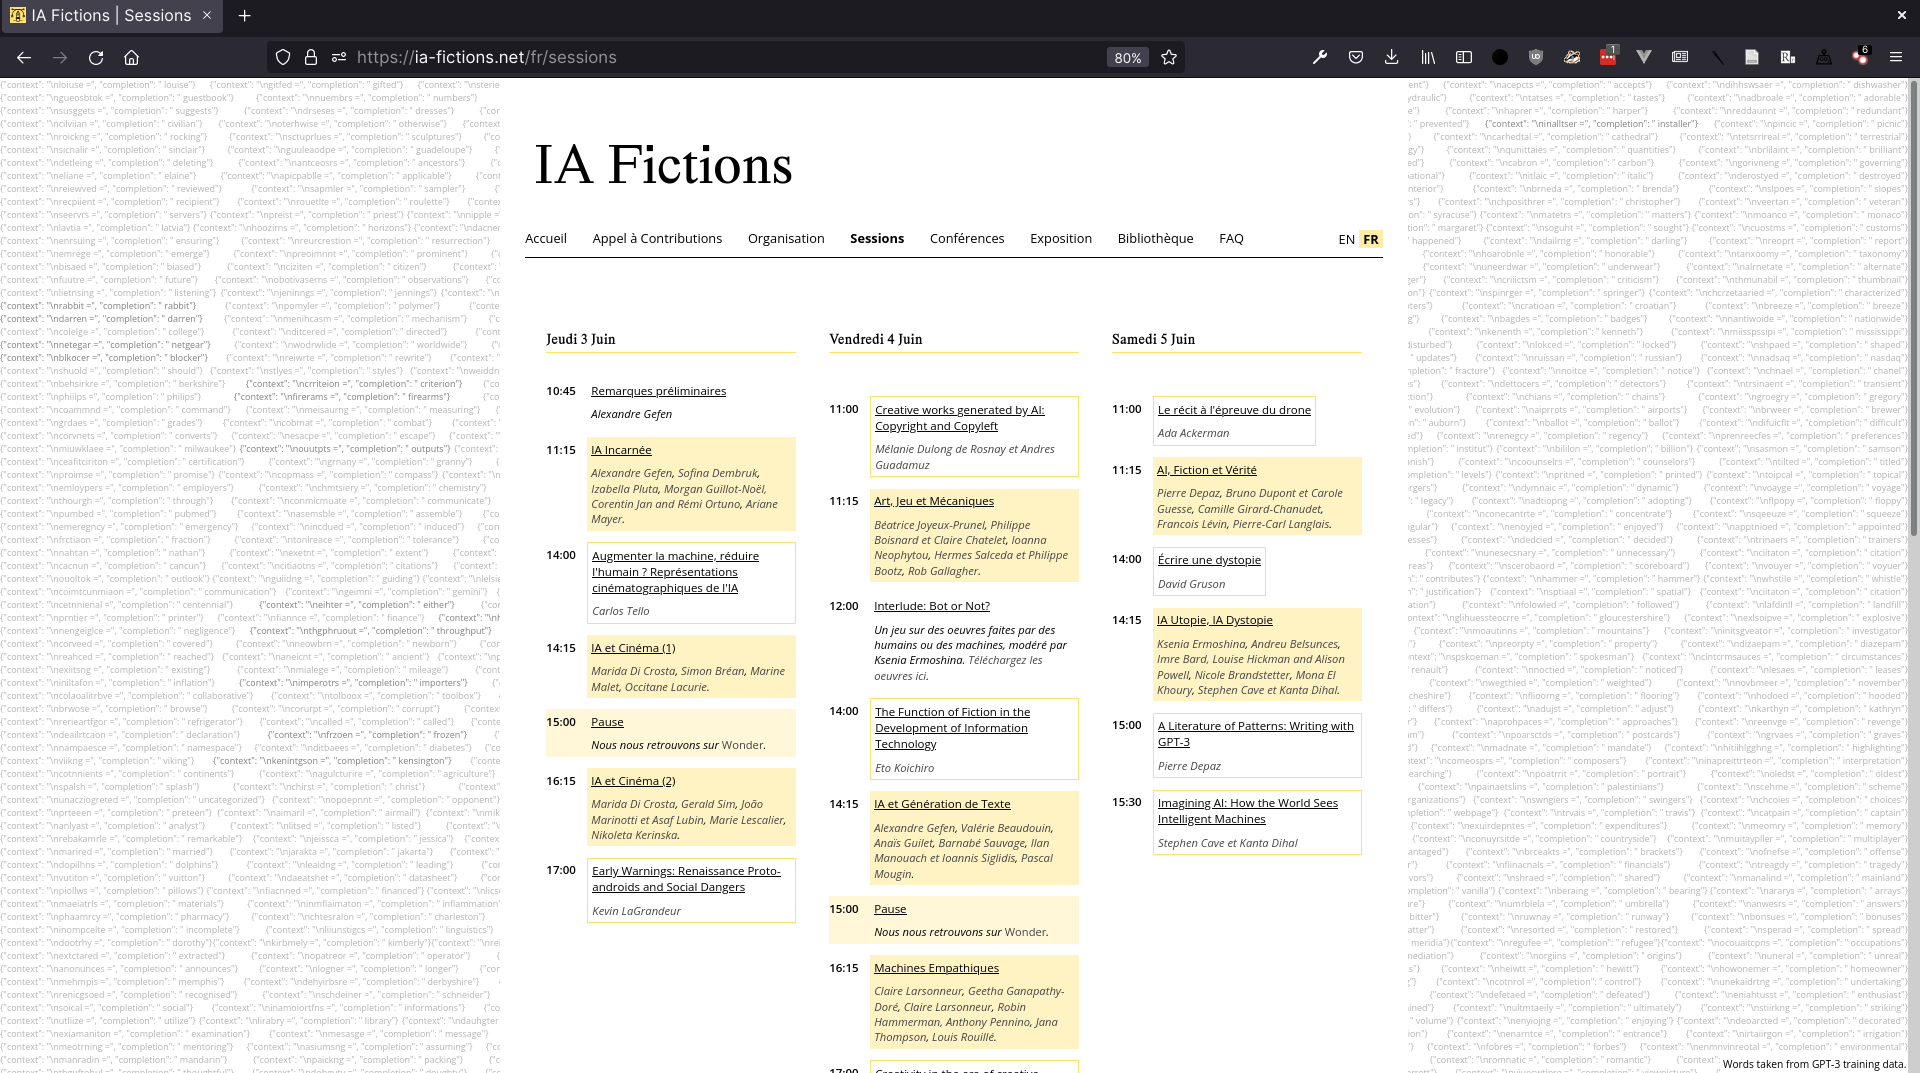 IA Fictions schedule page